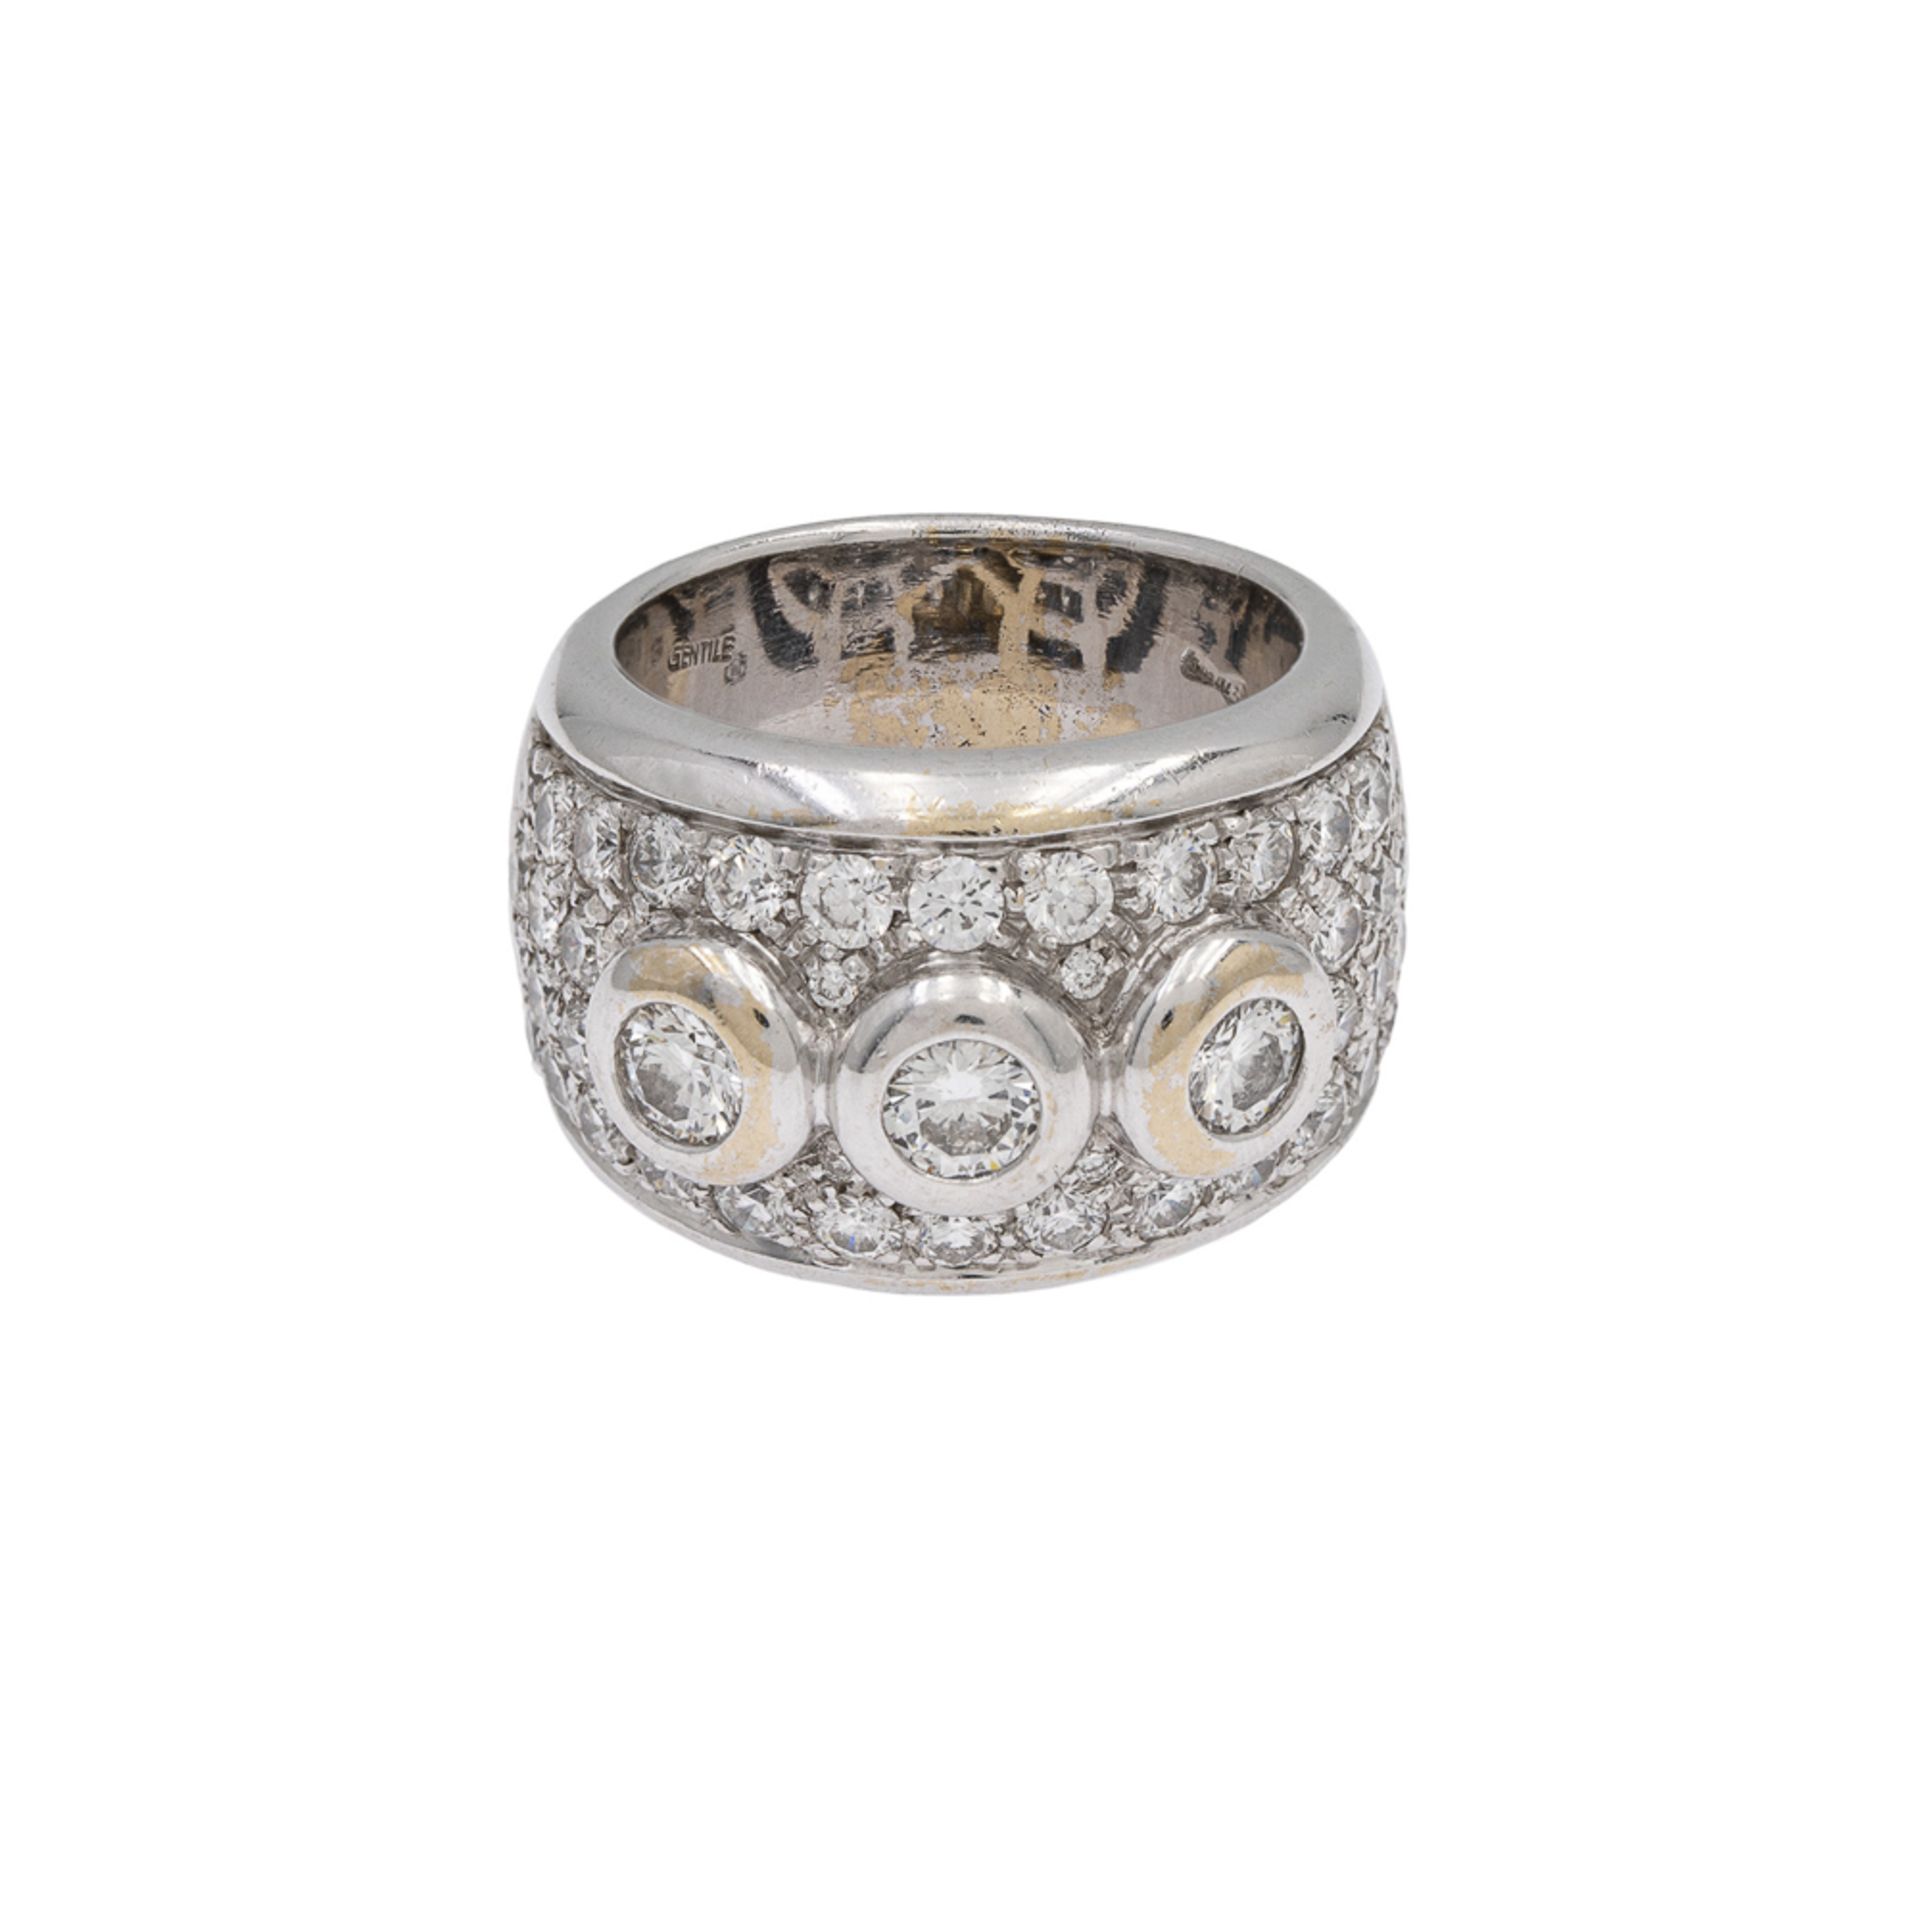 18kt white gold ring with three diamonds - Image 2 of 2